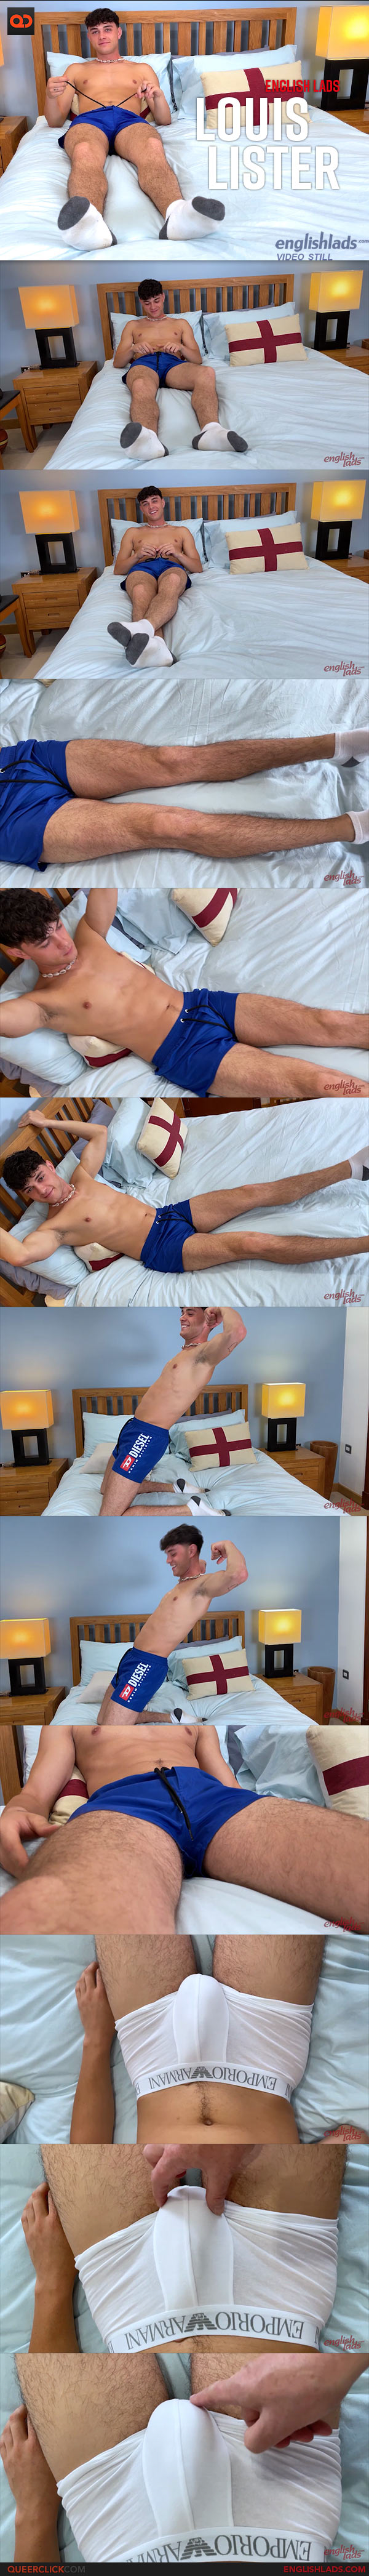 English Lads: Louis Lister - Young Straight Hottie Shows off his Lean Tanned Body and Uncut Cock